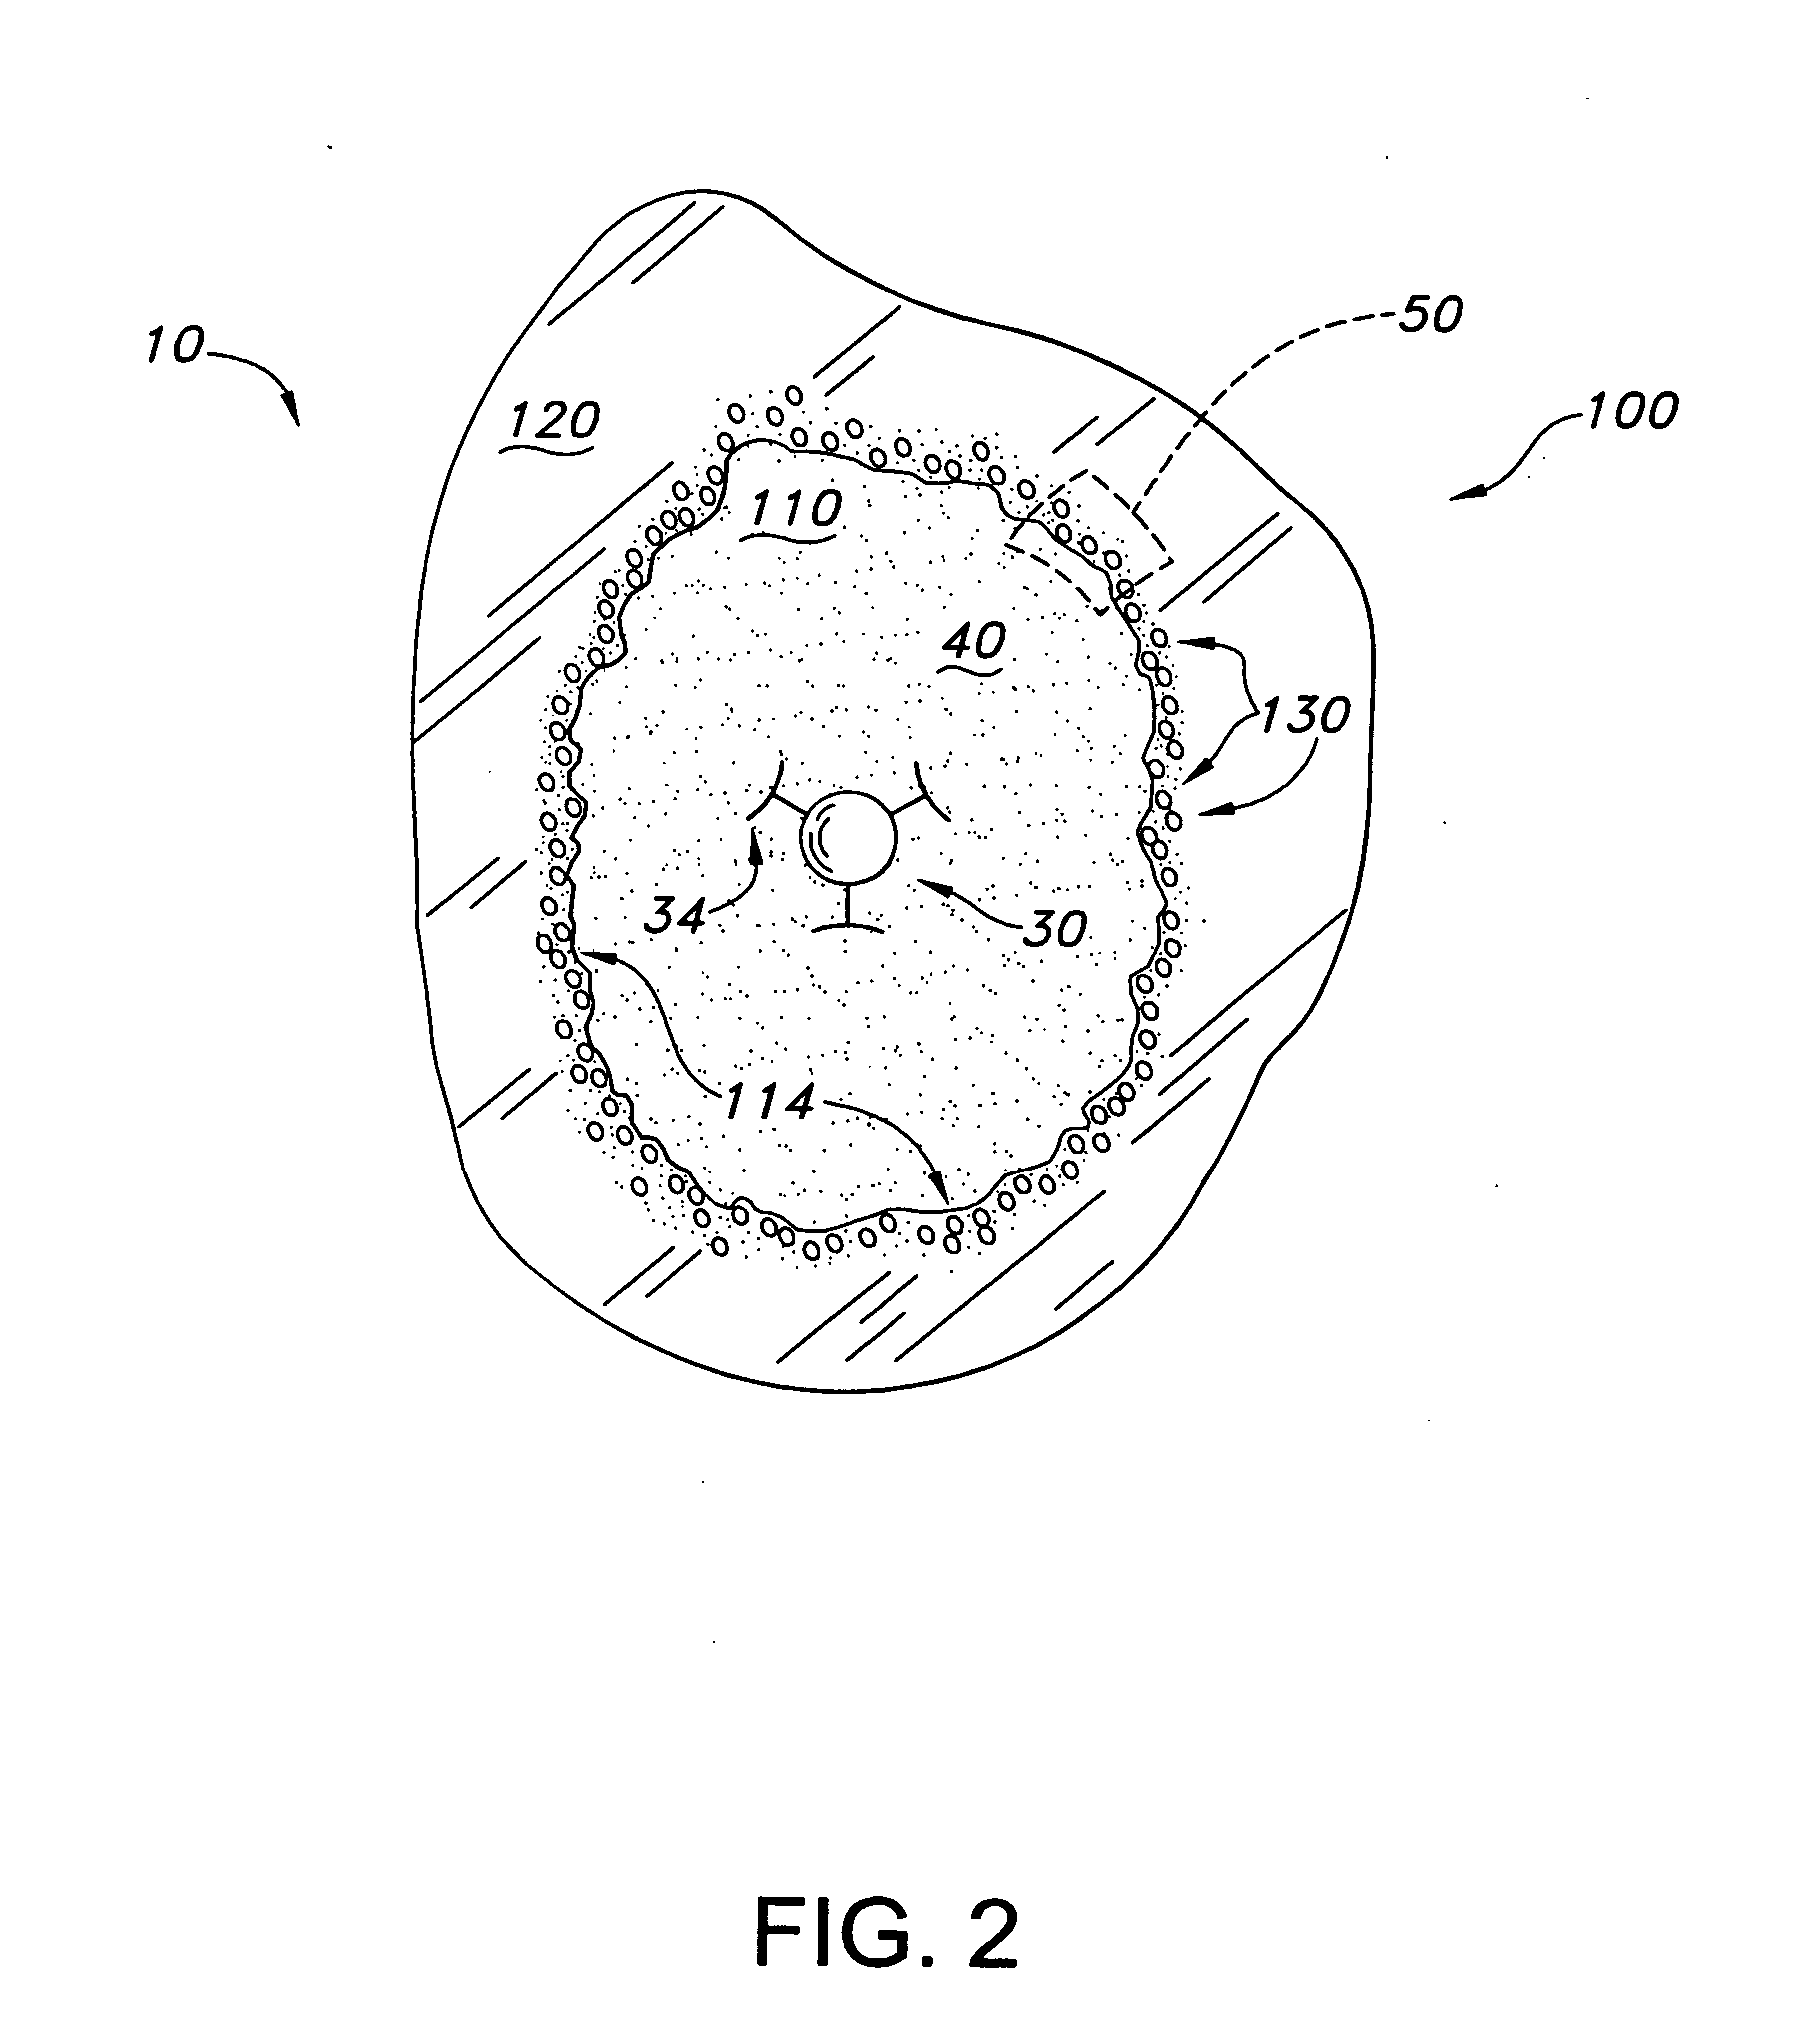 Method and apparatus for strengthening the biomechanical properties of implants